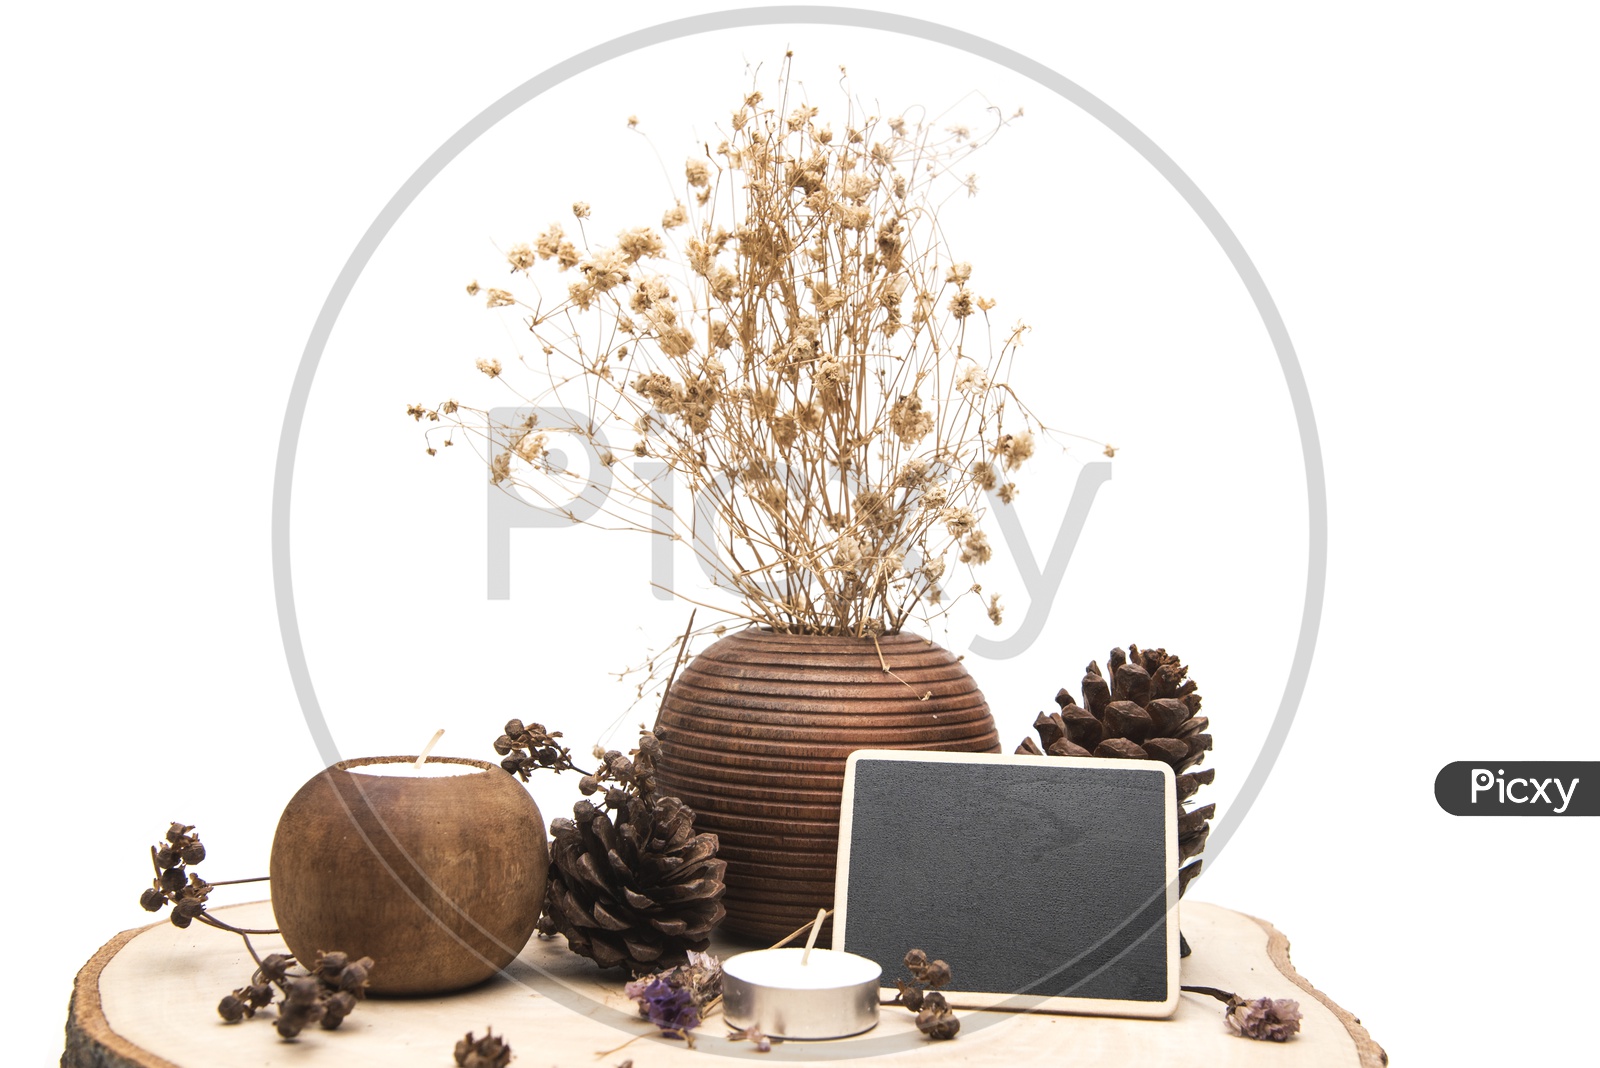 Dried flowers in a wooden vase and candles placed on a wooden table isolated on white background